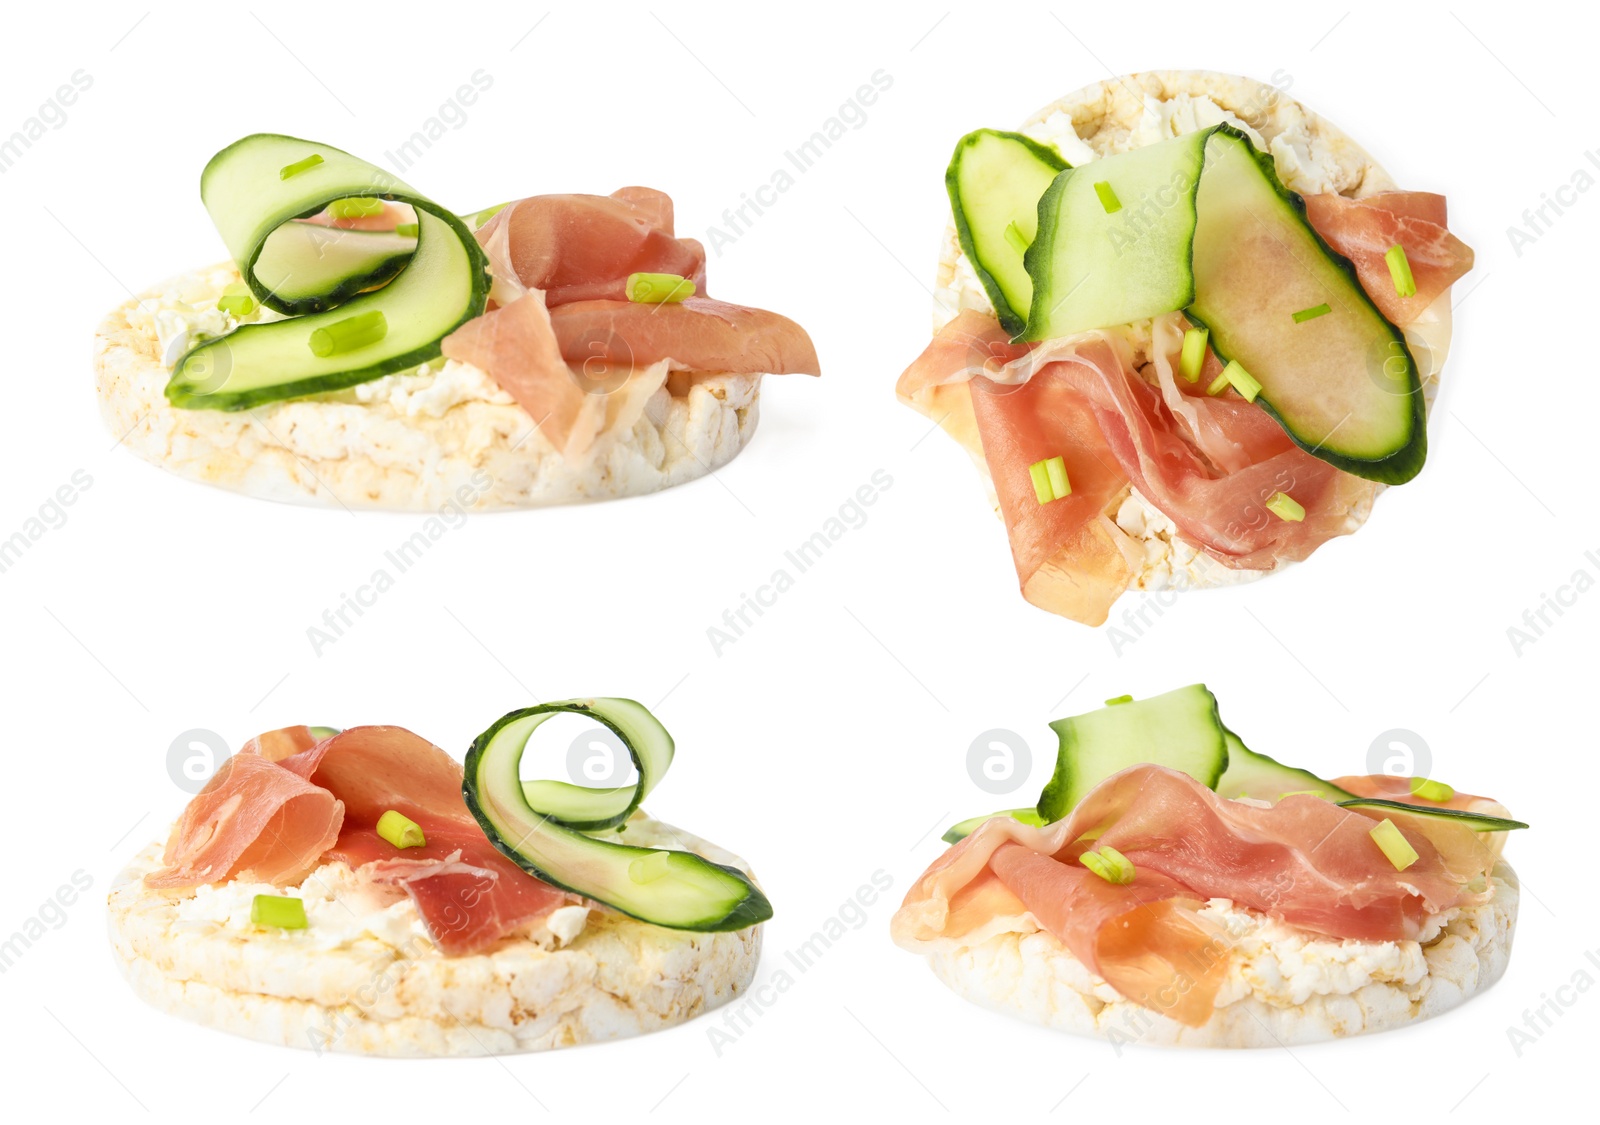 Image of Puffed corn cake with prosciutto and cucumber on white background, view from different sides